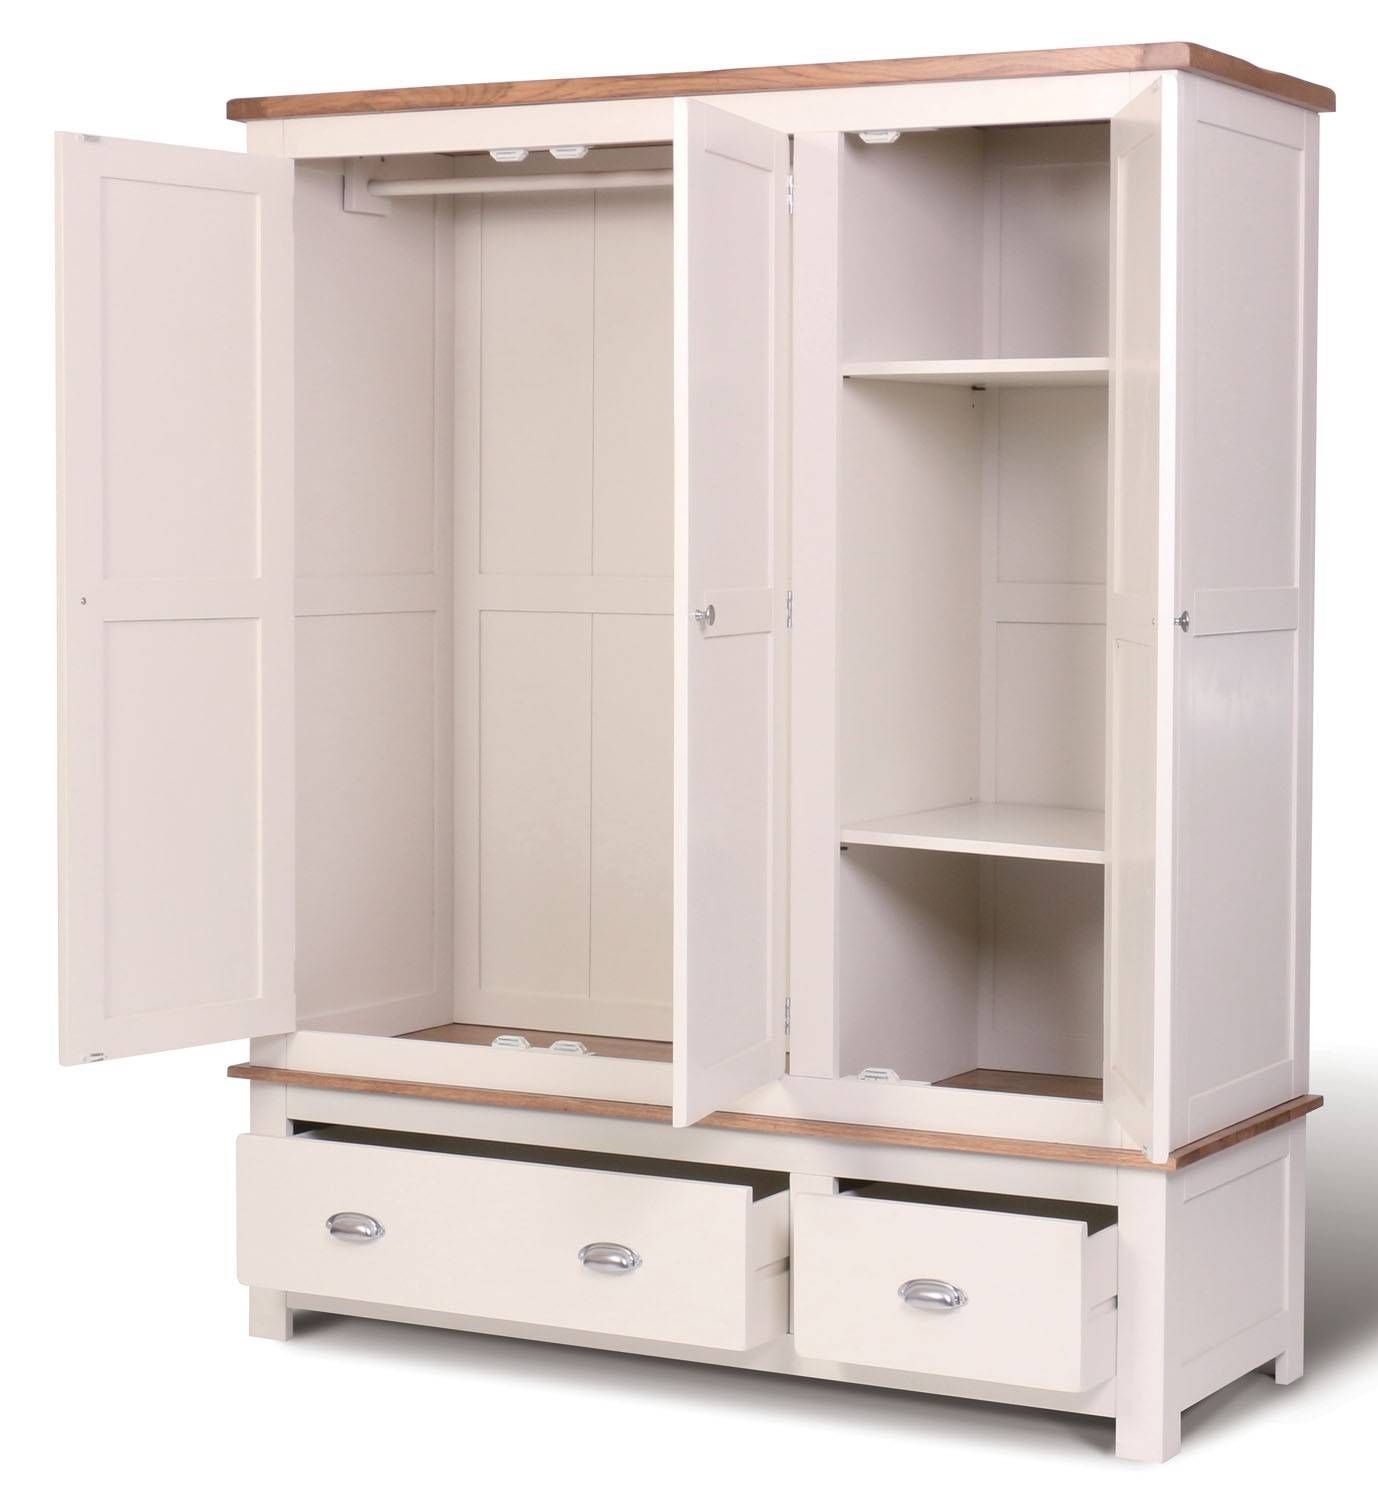 Ascot Triple Wardrobe With Drawers – Wardrobes – Bedroom | Hallowood With Regard To Wardrobes With Shelves And Drawers (View 9 of 30)